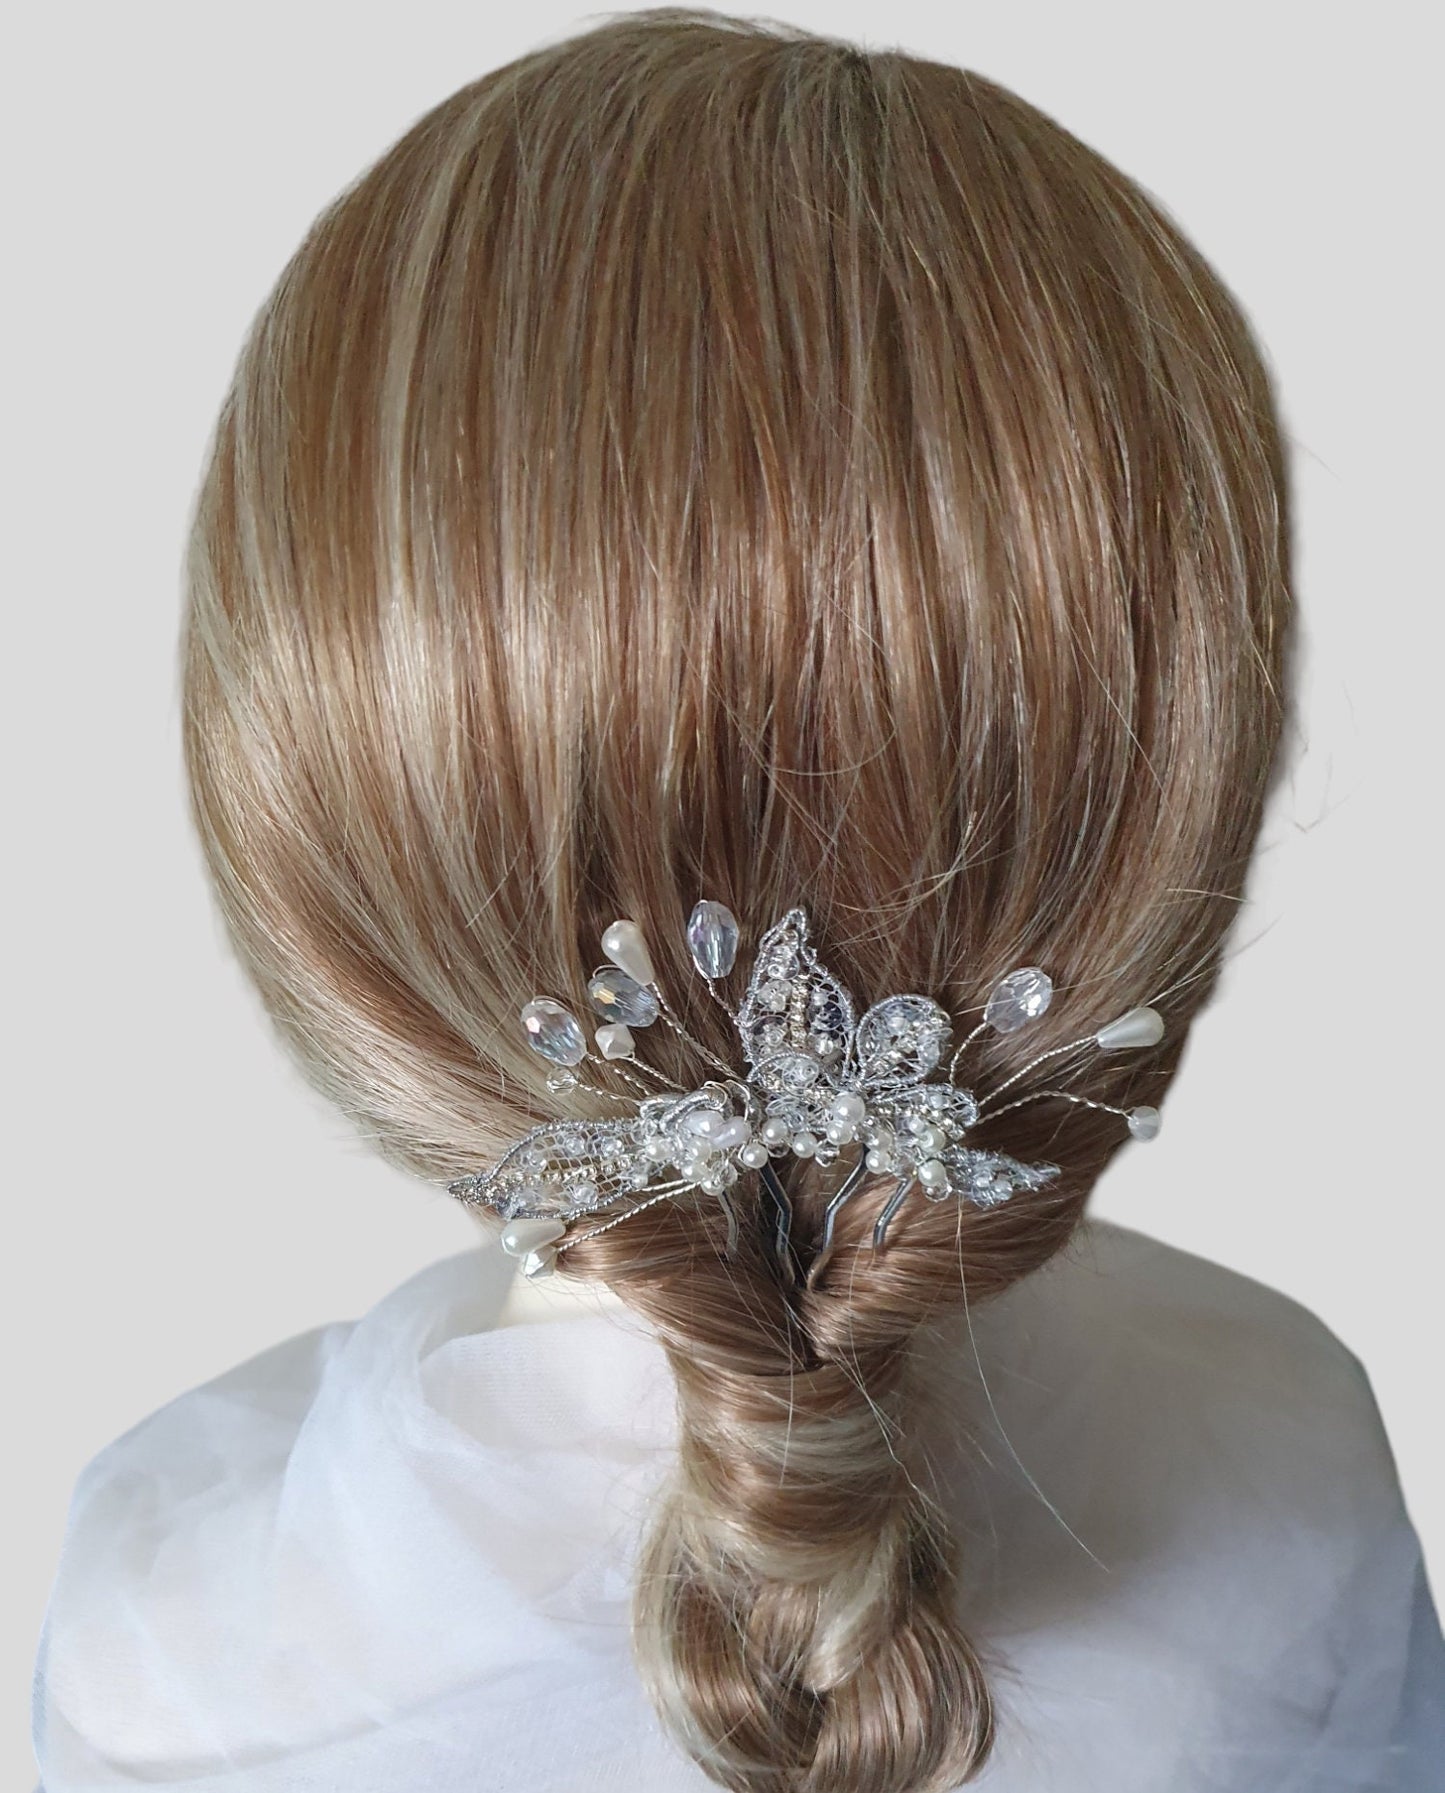 Handmade bridal comb with pearls and drop stones - elegant hair accessory for weddings, guests and parties, silver-colored metal comb